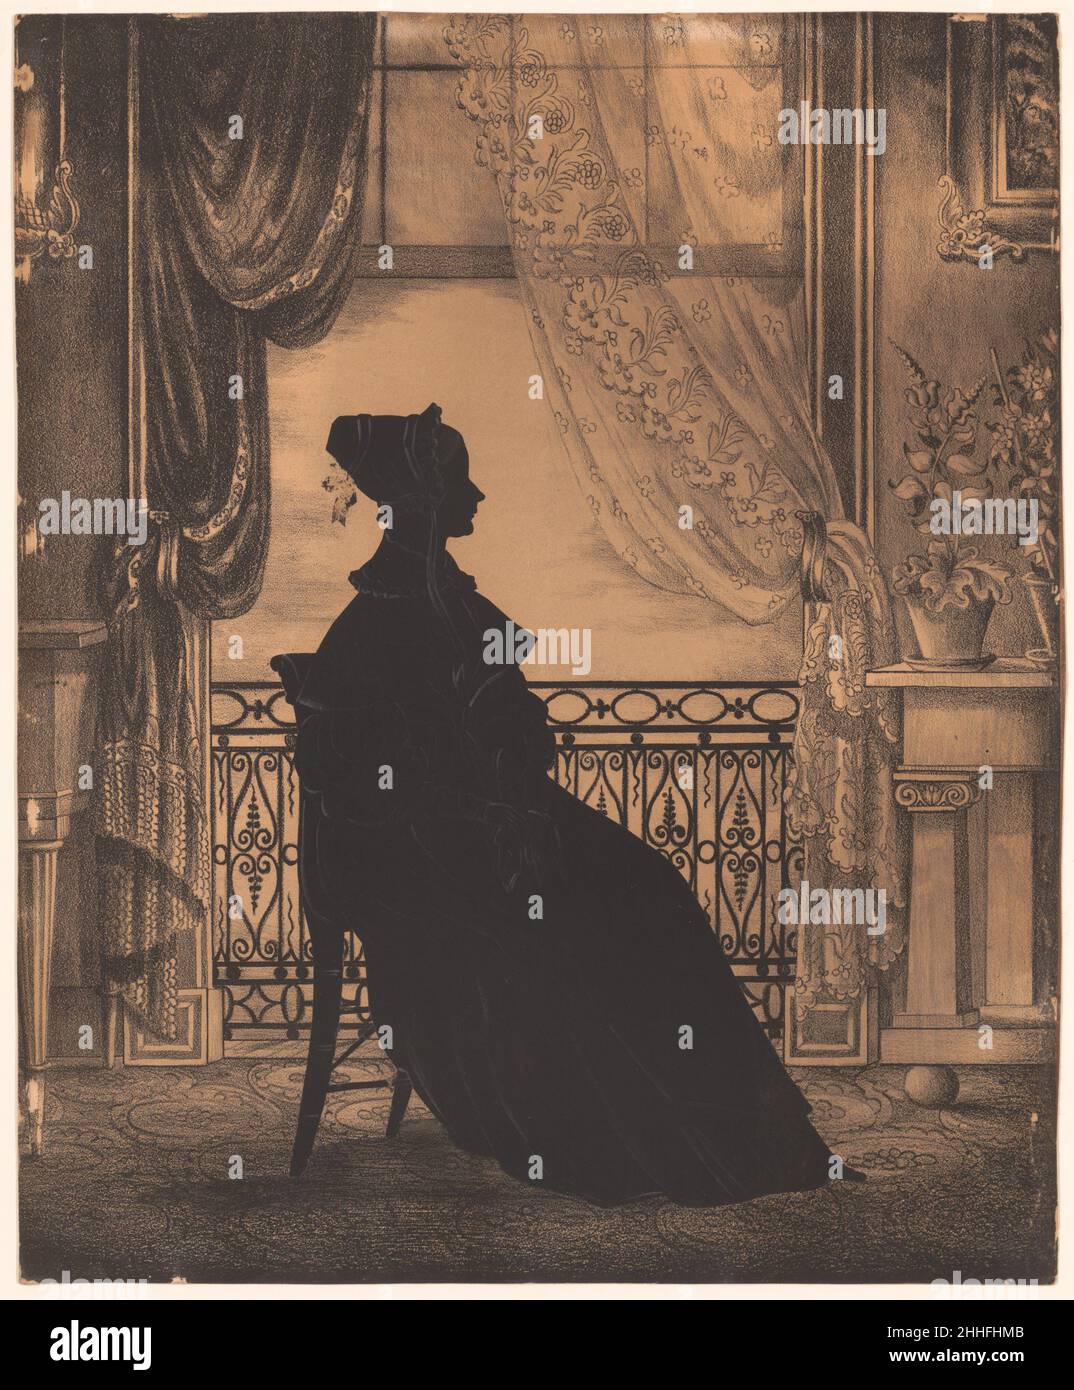 Portrait of a Woman before a Window ca. 1850 Attributed to William Henry Brown American While its subject is unknown, this image has been linked to William Henry Brown, who was among the most prolific silhouette portraitists of the nineteenth century. Brown tended to affix his silhouettes to sepia-toned lithographs that mimicked the look of drawings, as is the case here. Usually made by cutting a profile portrait from black-inked paper, silhouettes were wildly popular throughout the nineteenth century. The democratic nature of the art form can be attributed to the affordability of the material Stock Photo